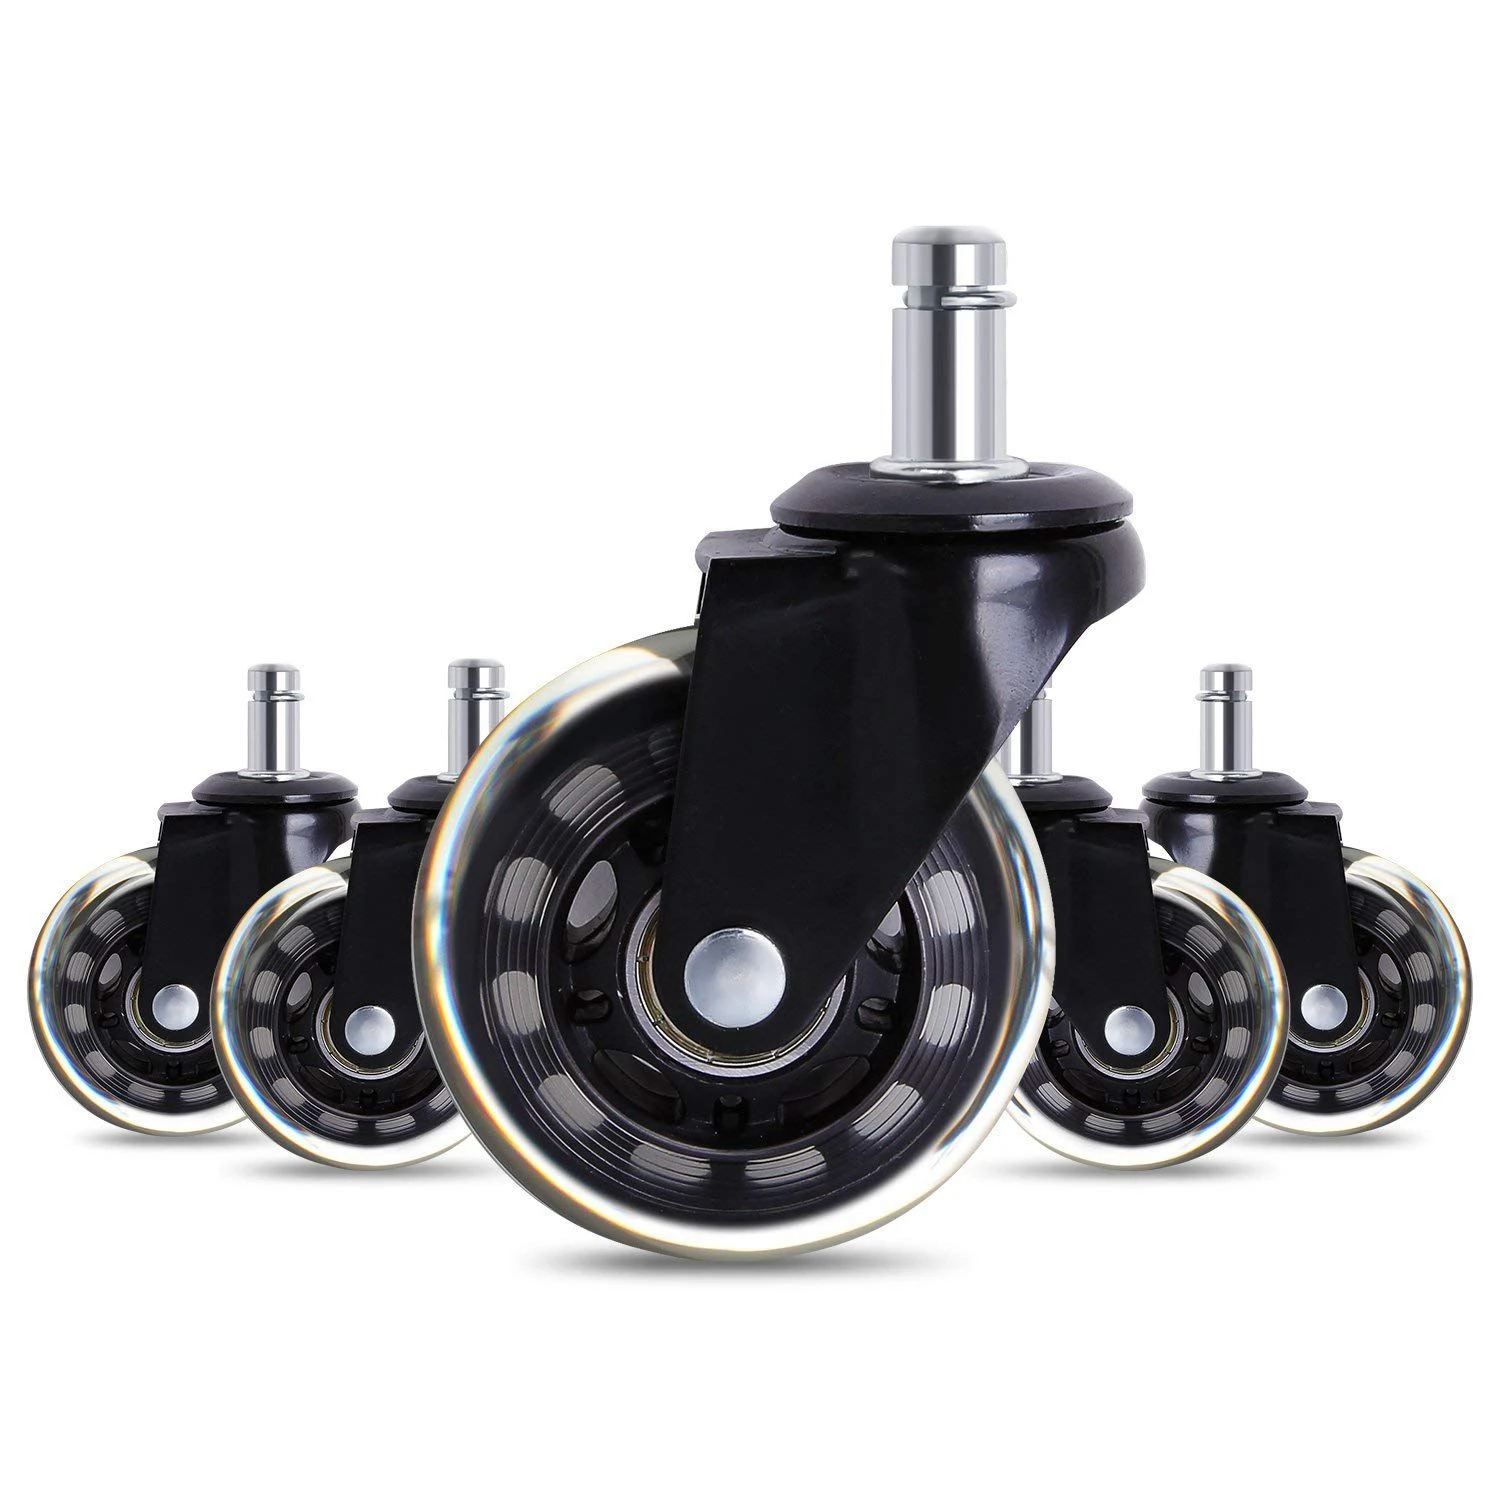 5 Pcs Furniture Caster Hot Sale Office Chair Caster Wheels Roller Rollerblade Style Castor Wheel Replacement 25inches Kastor Aliexpress